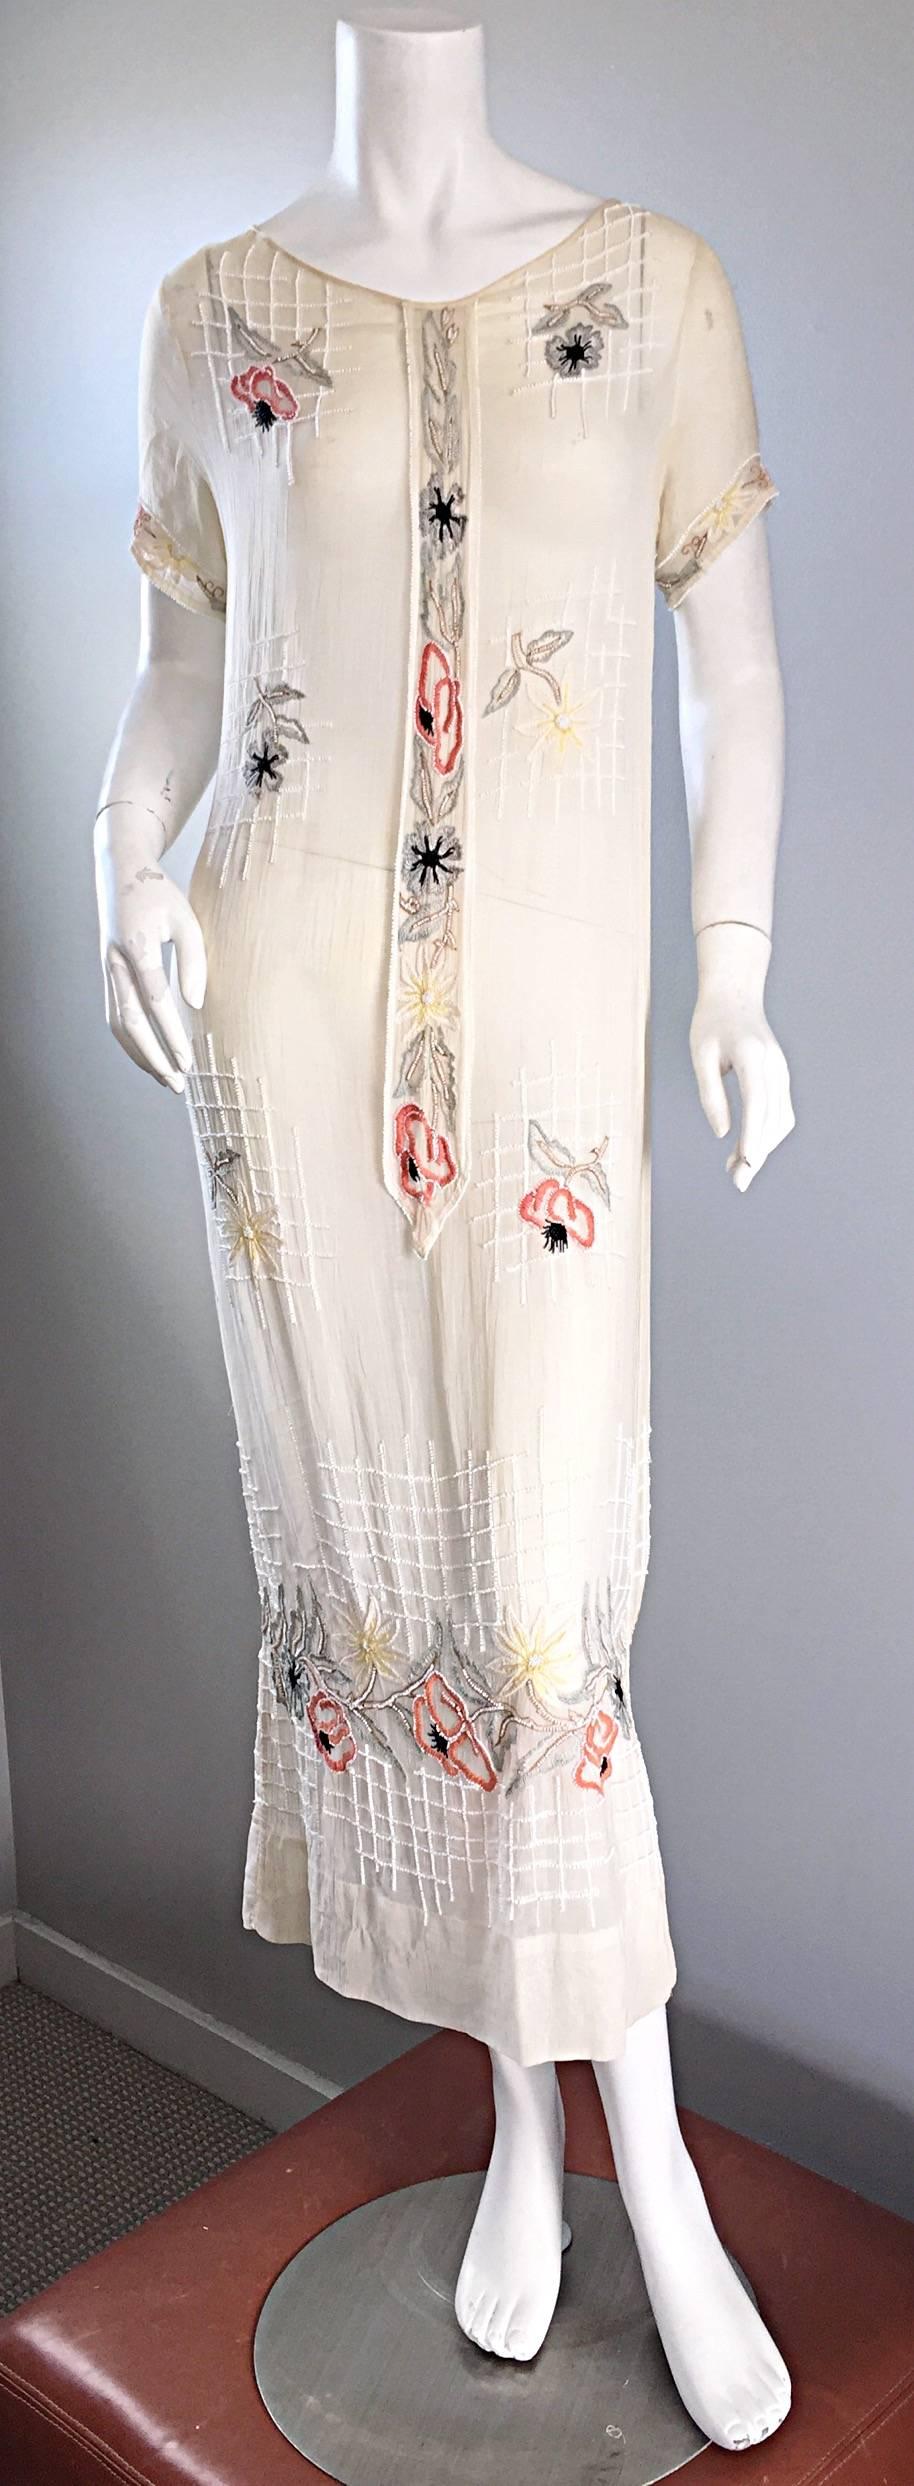 Incredible, and rare 20s B. ALTMAN Haute Couture dress! Completely hand sewn, and hand embroidered/beaded. This beauty is nothing short of exceptional! Lightweight semi sheer cotton voile looks great alone, or with a slip under. Attached beaded